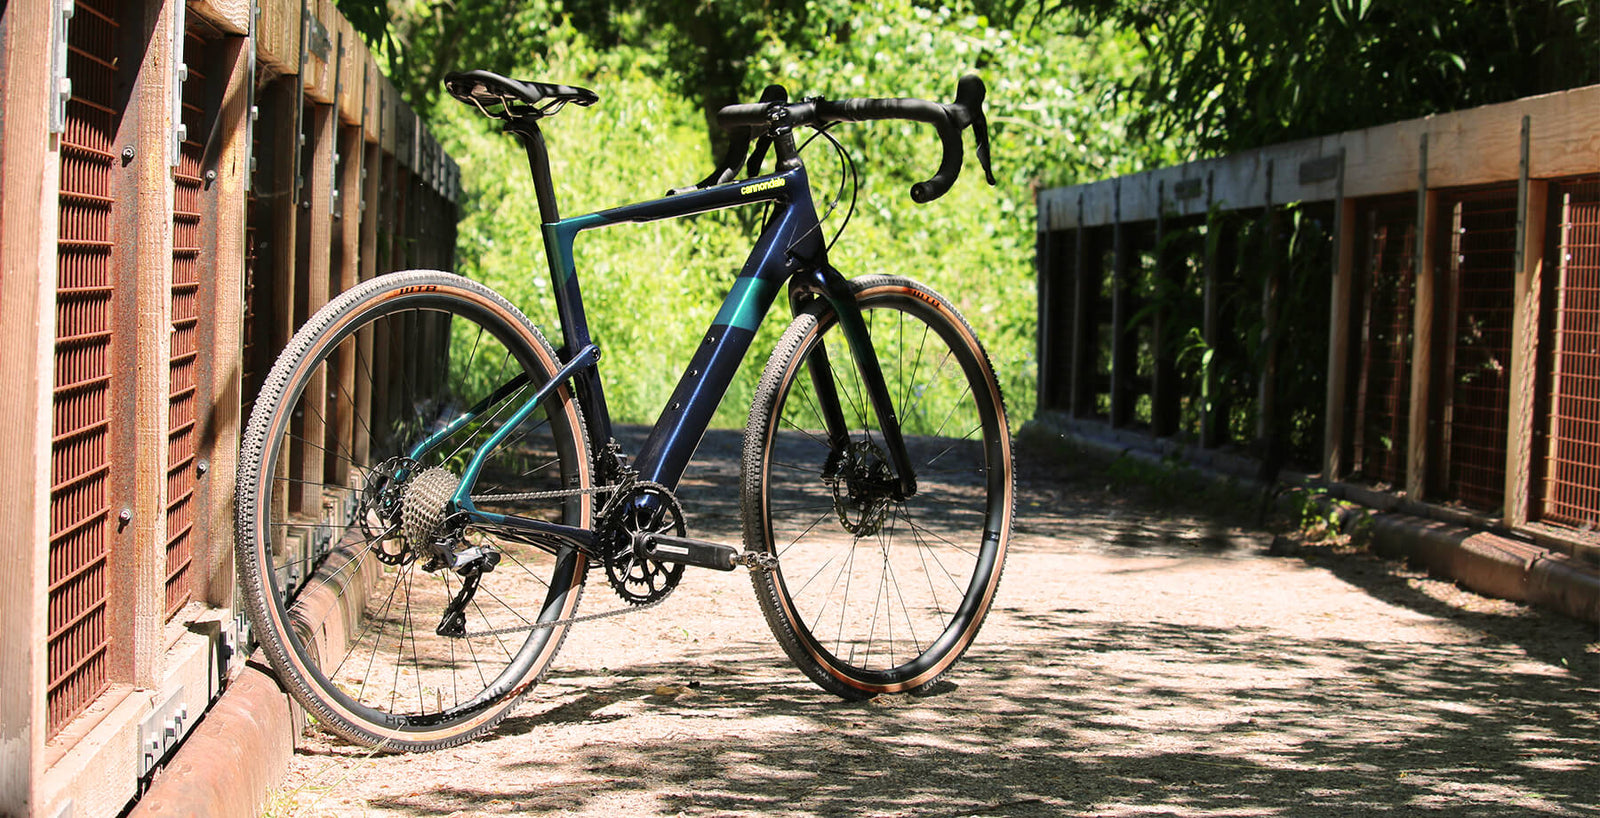 Introducing the Cannondale Topstone Carbon Gravel Bike